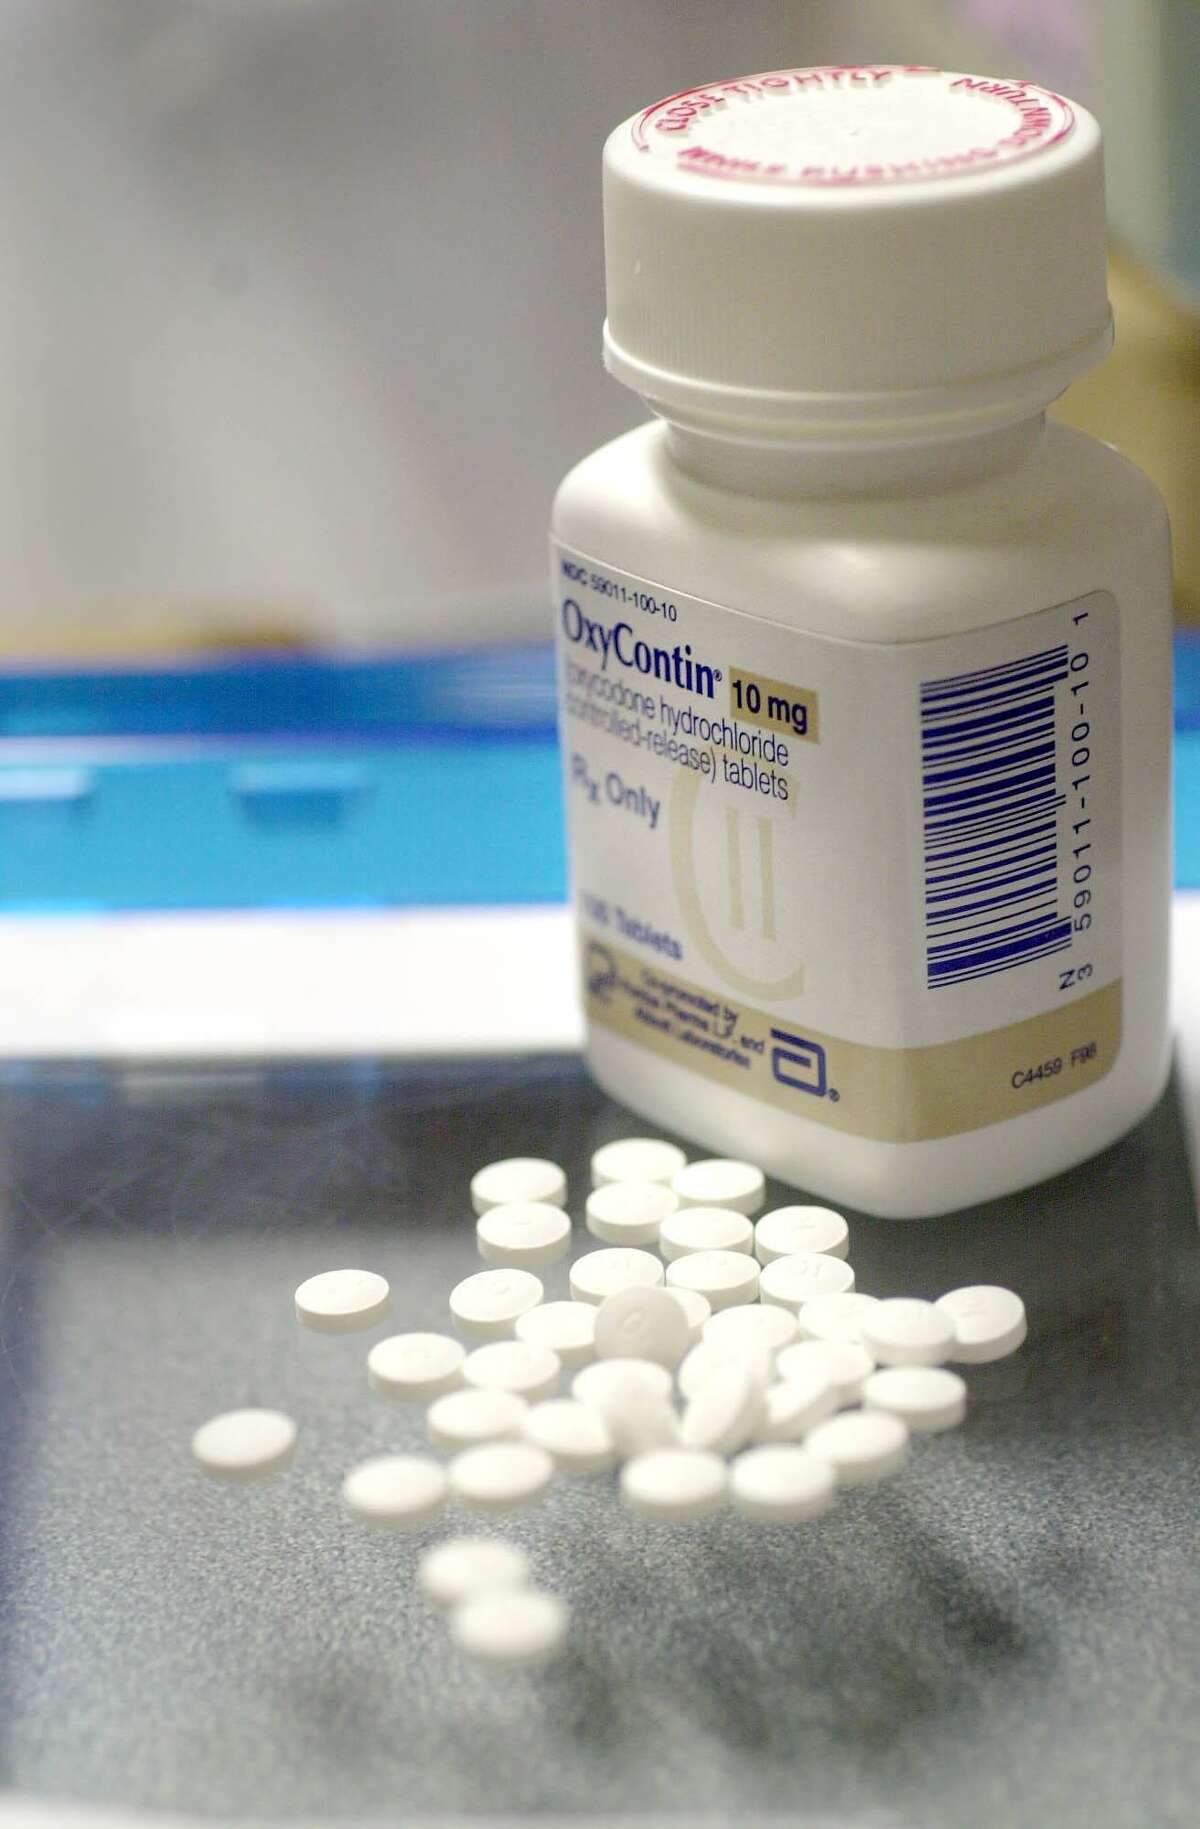 A bottle of OxyContin by Stamford, Conn.-based Purdue Pharma.